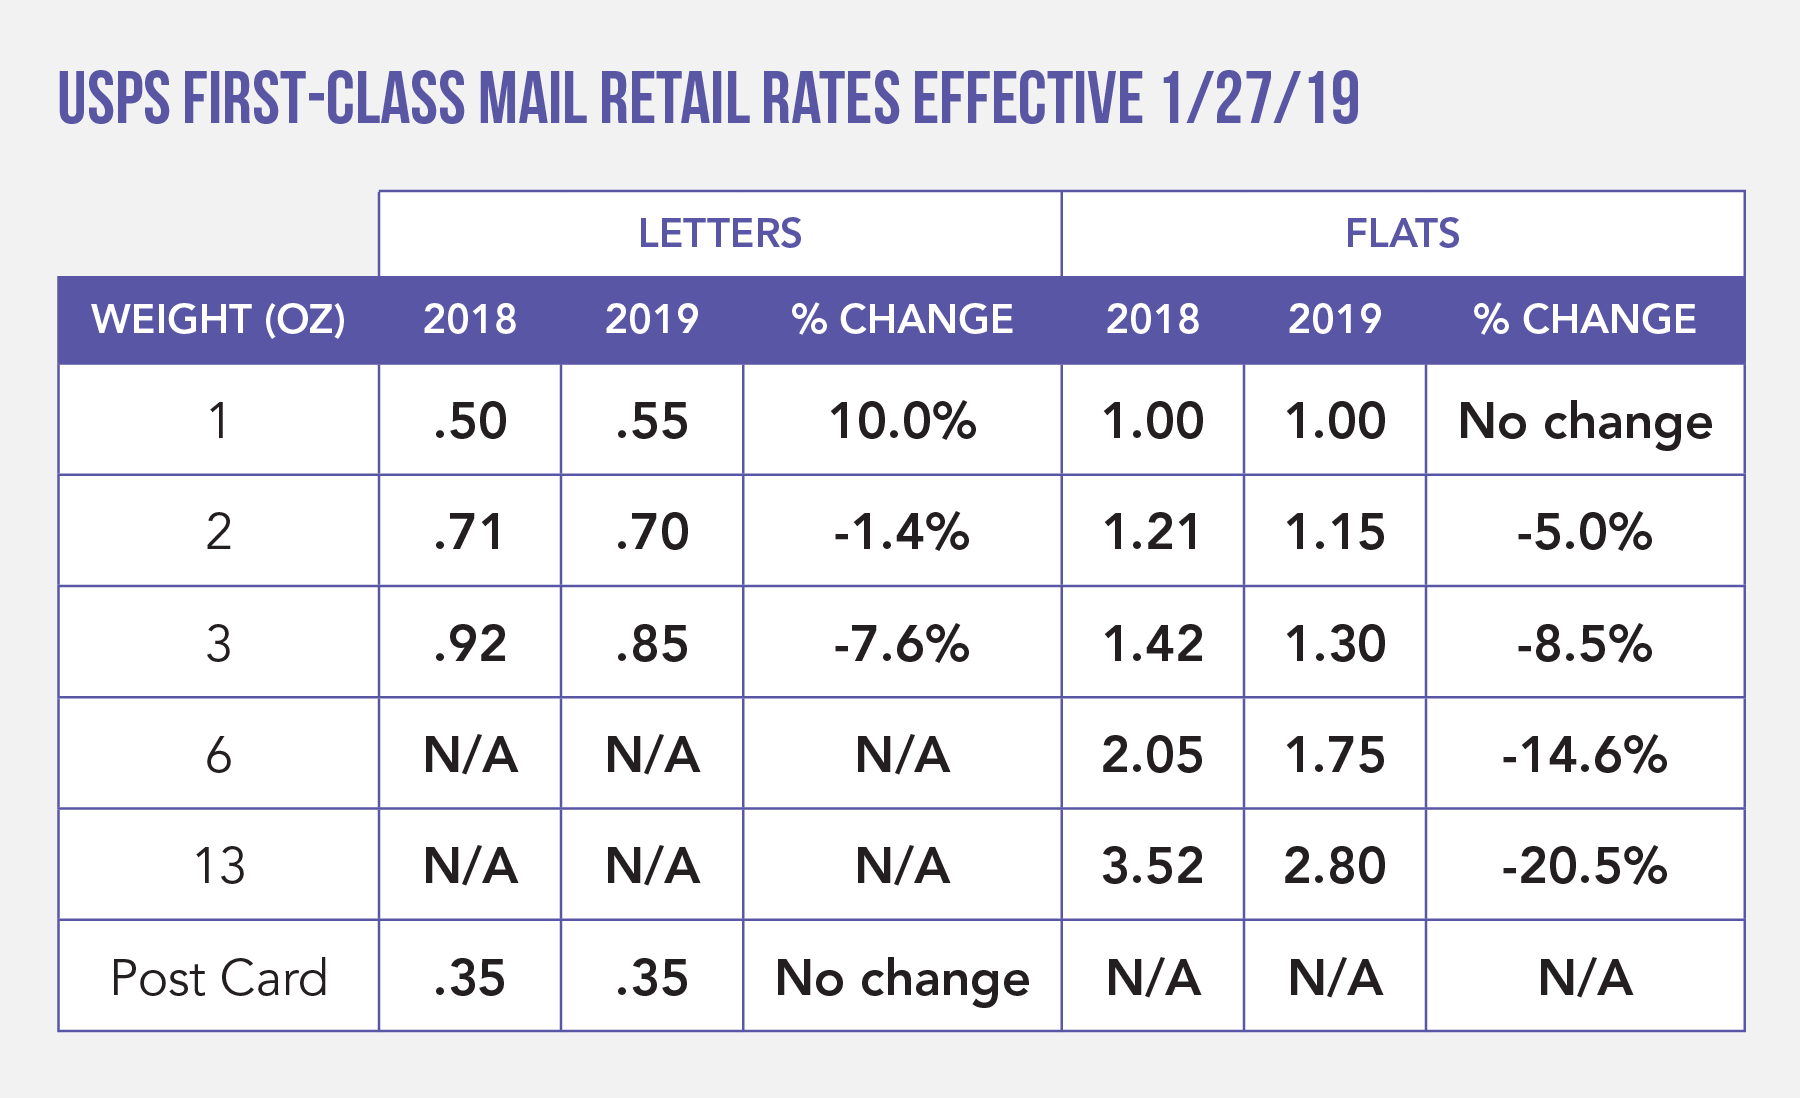 USPS First-Class Mail Retail Rates Effective January 27, 2019